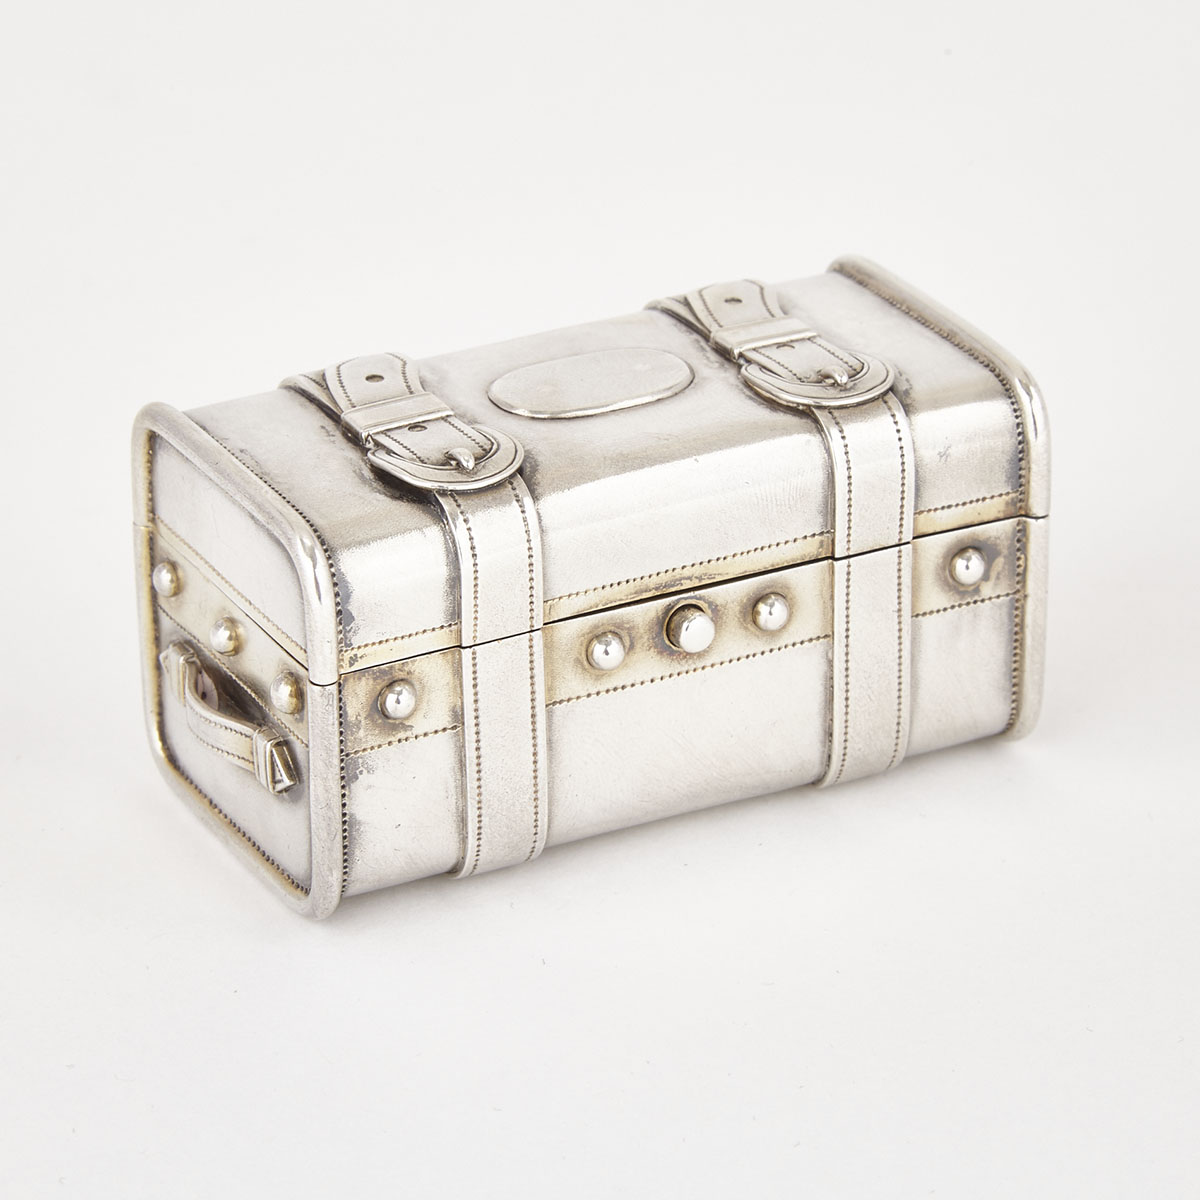 Russian Silver Steamer Trunk-Form Snuff Box, Carl Siewers, St. Petersburg, late 19th century